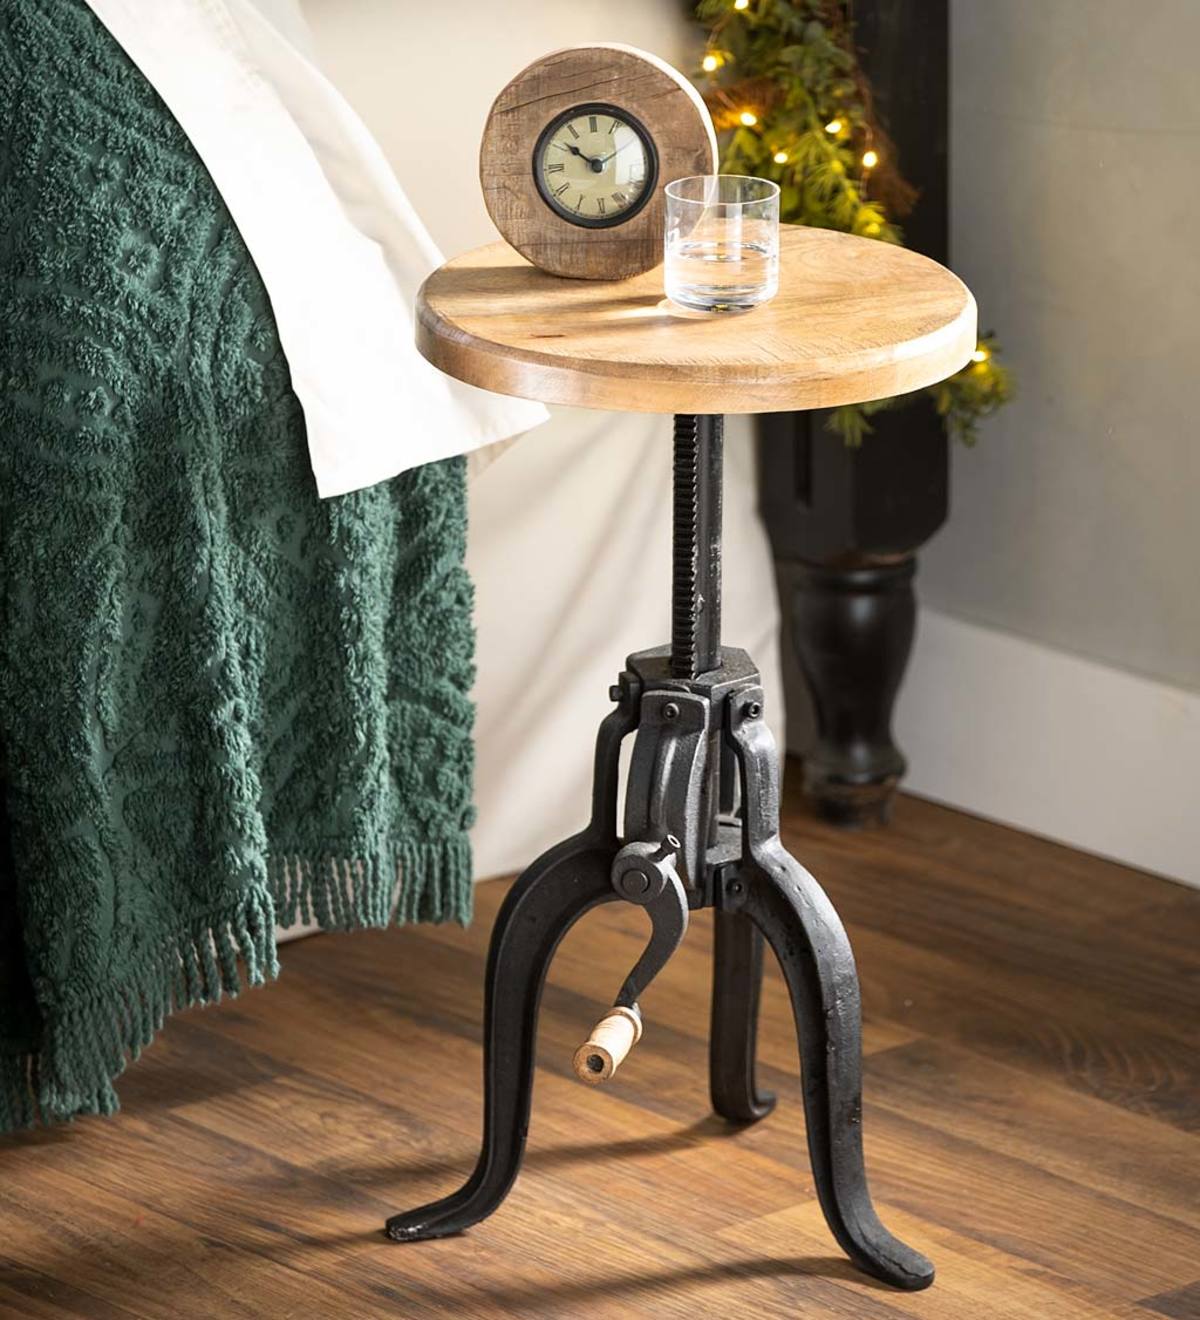 Rustic Crank Table with Adjustable Height